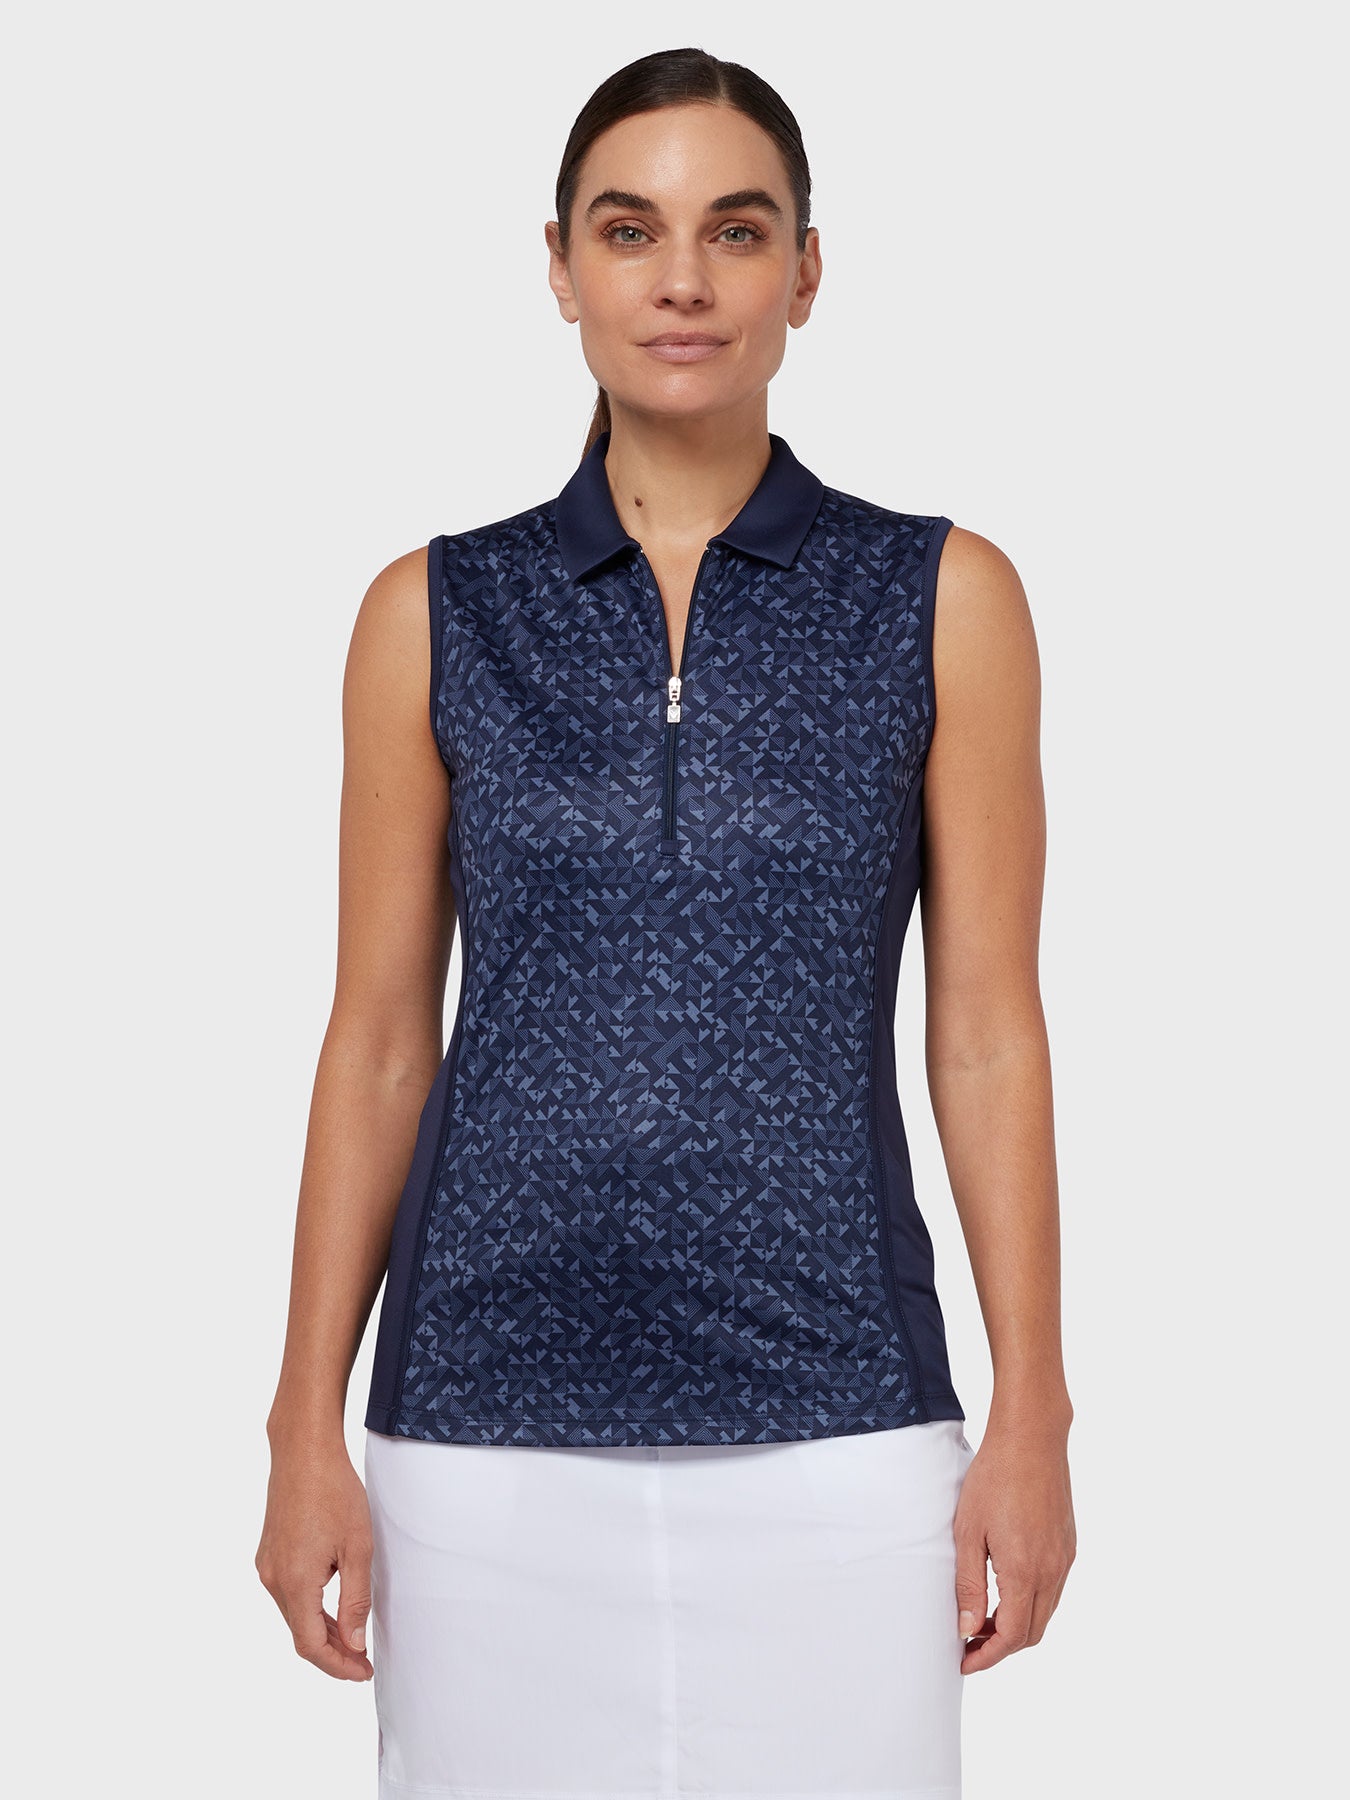 View Shape Shifter Geo Print Womens Golf Polo In Peacoat Peacoat S information